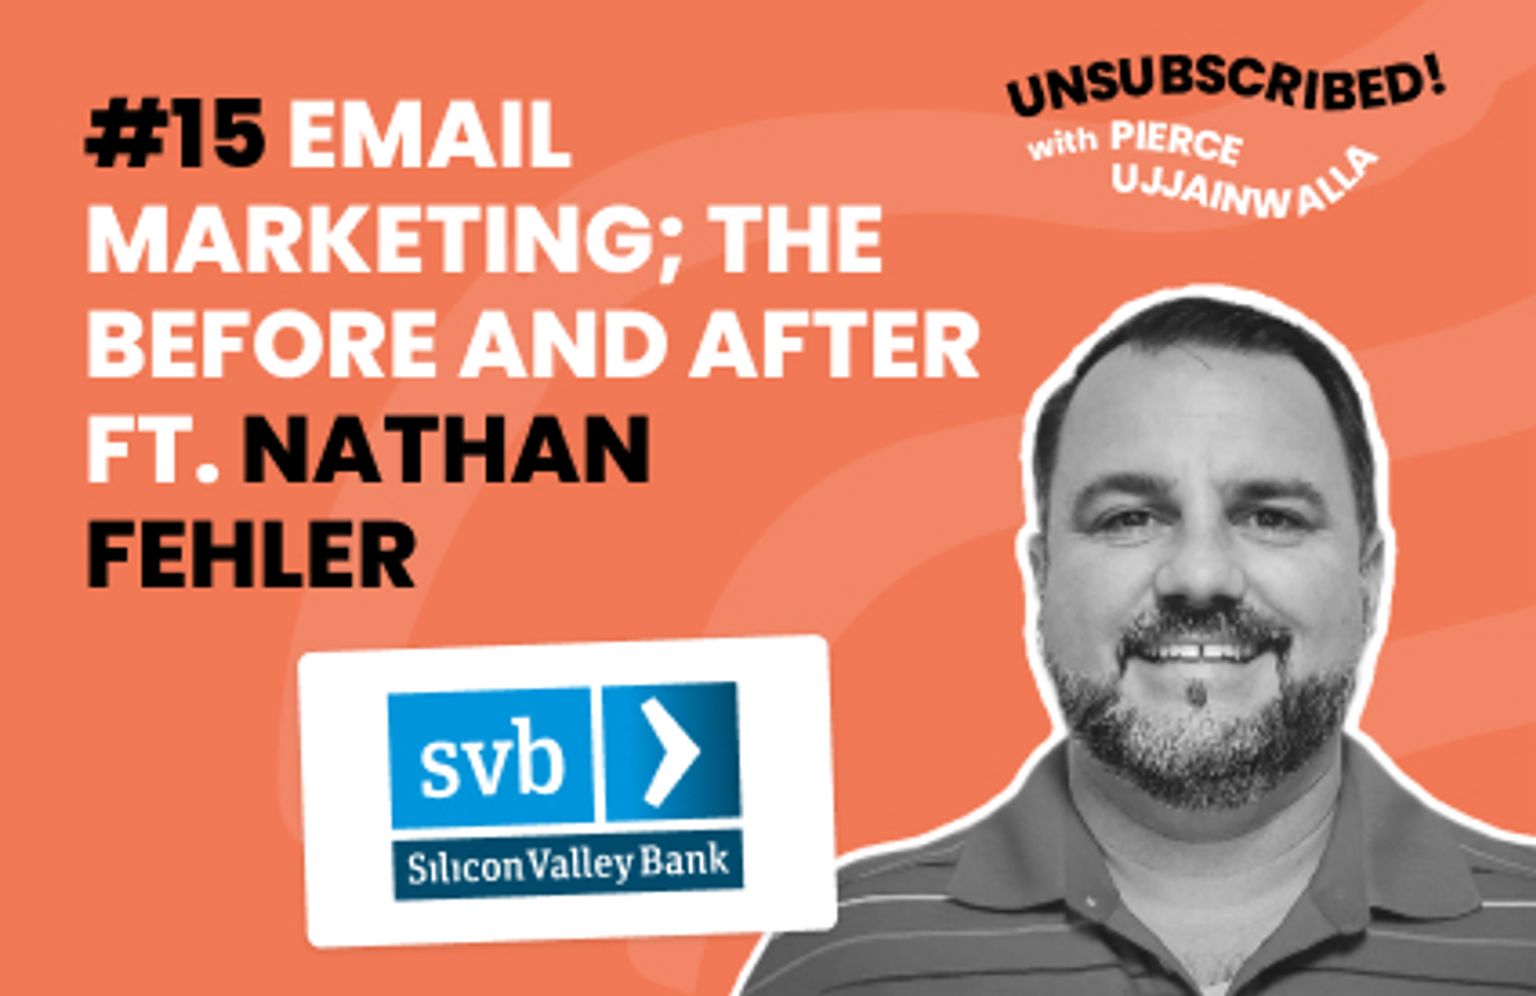 #15 Email Marketing in a pandemic: the before and after featuring Nathan Fehler of Silicon Valley Bank